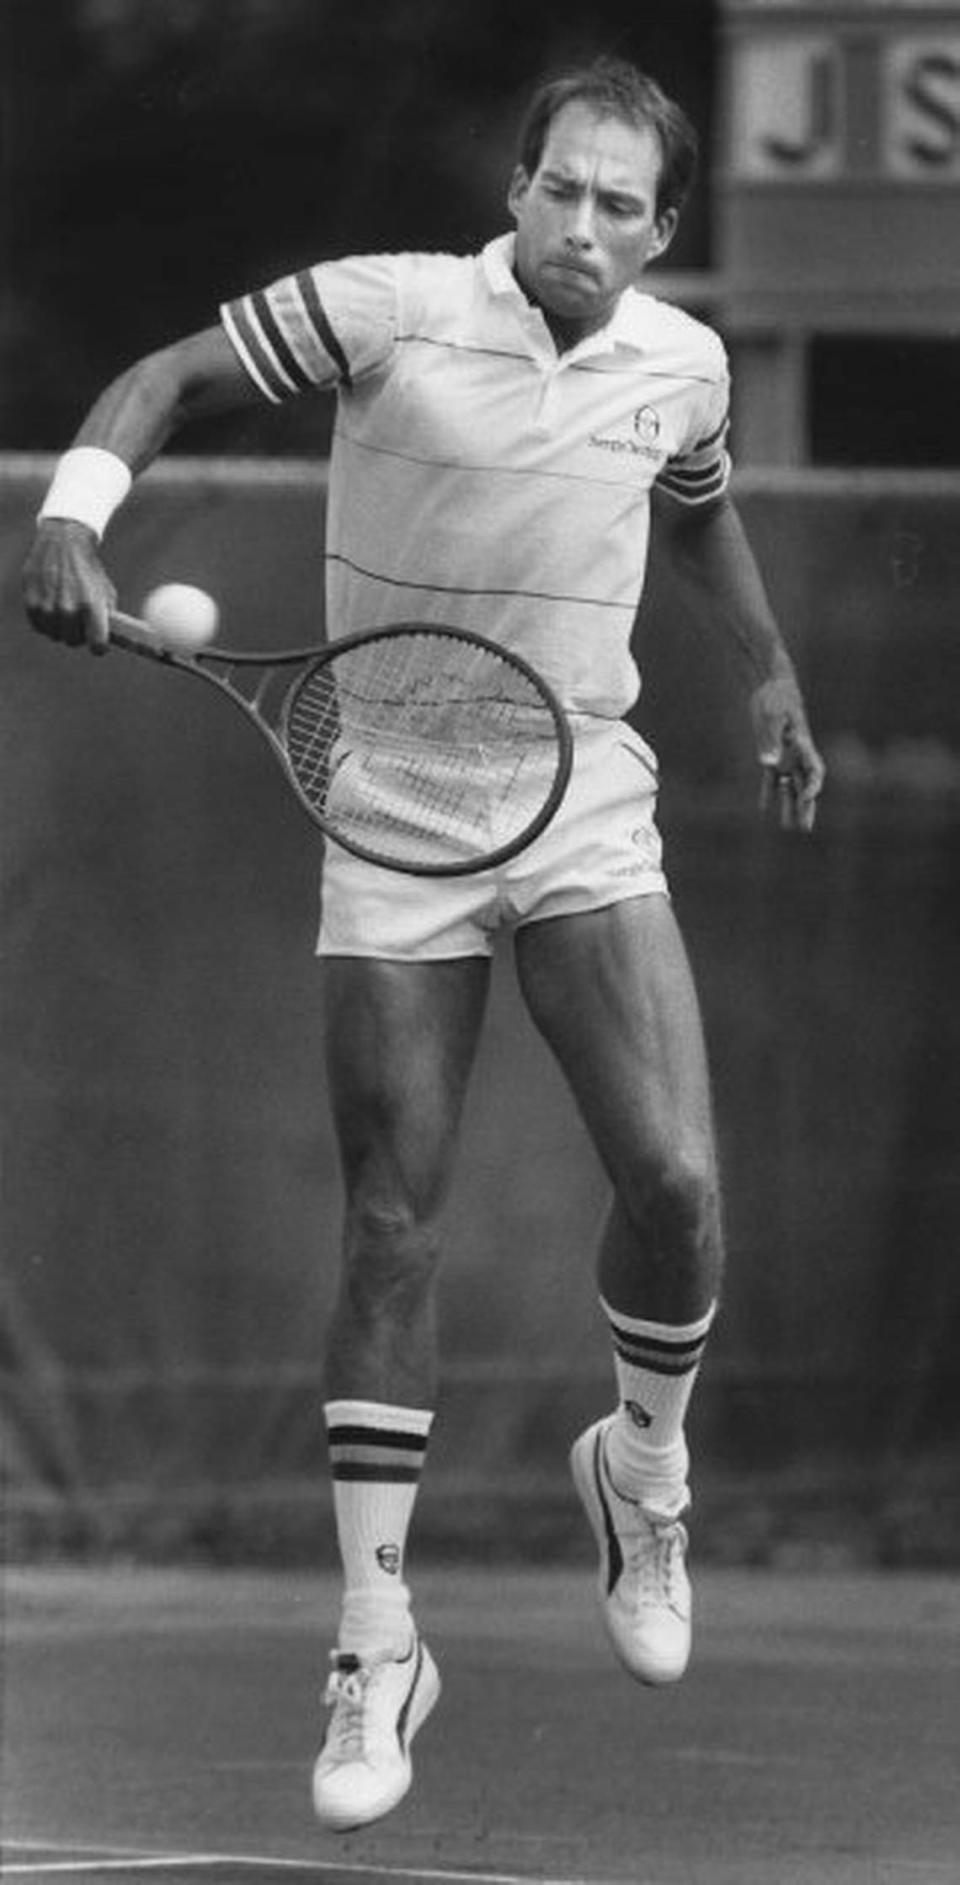 John Sadri played for Bob Benson’s World TeamTennis franchise in the 1980s in Charlotte and once tried to ace Benson four times in a row on a bet.